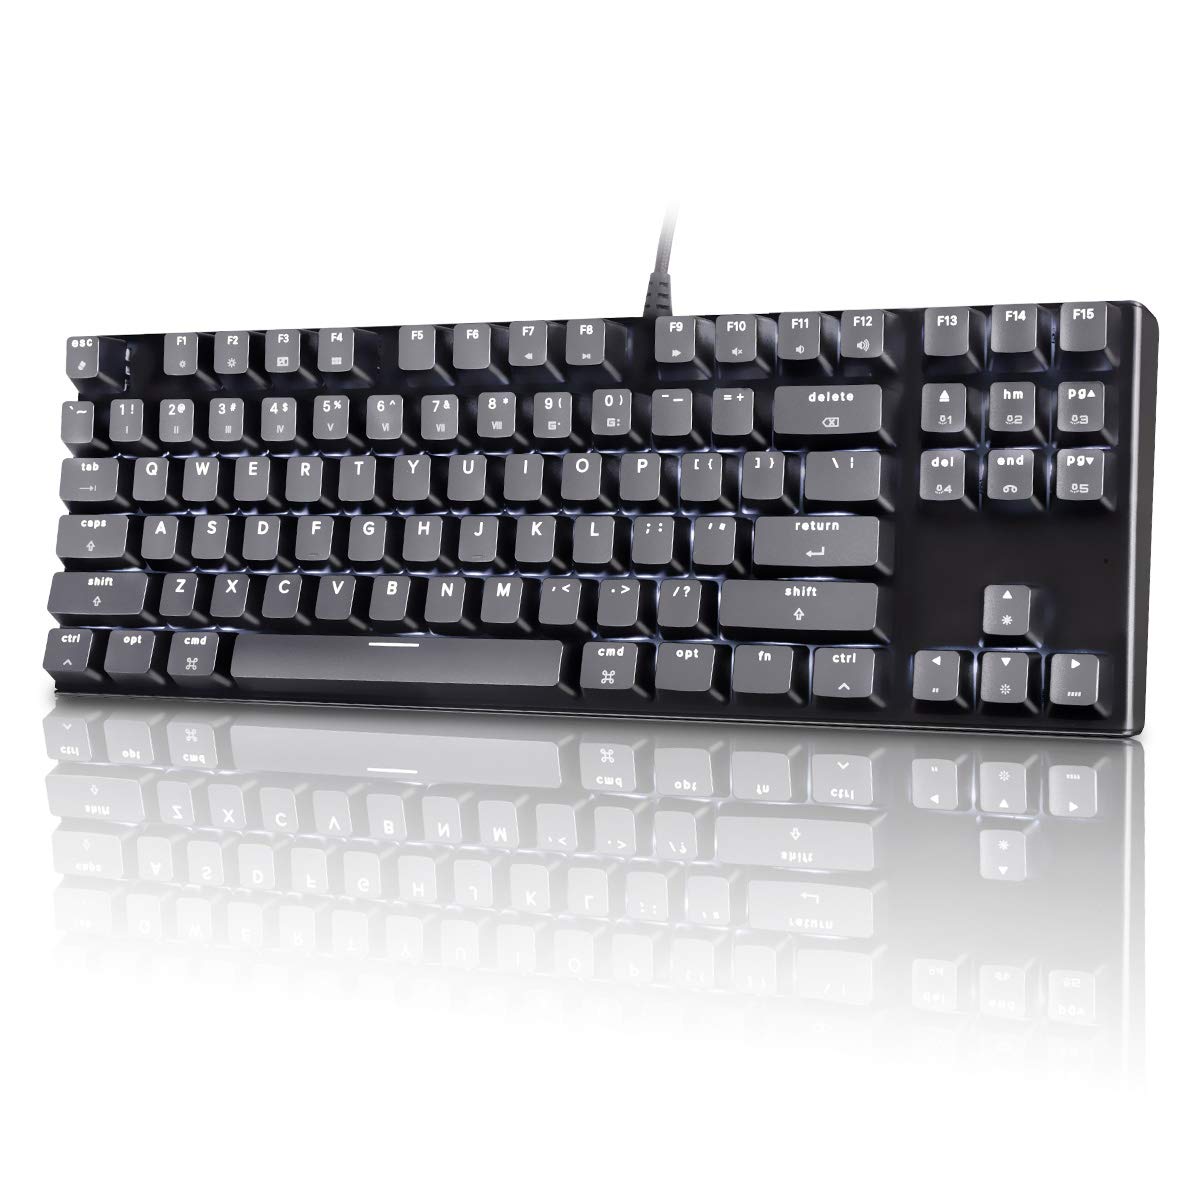 87-Key Velocifire M87 Mac Layout Wired Mechanical Keyboard w/ White LED Backlight (Tactile Brown Switches)​ $30 + Free Shipping